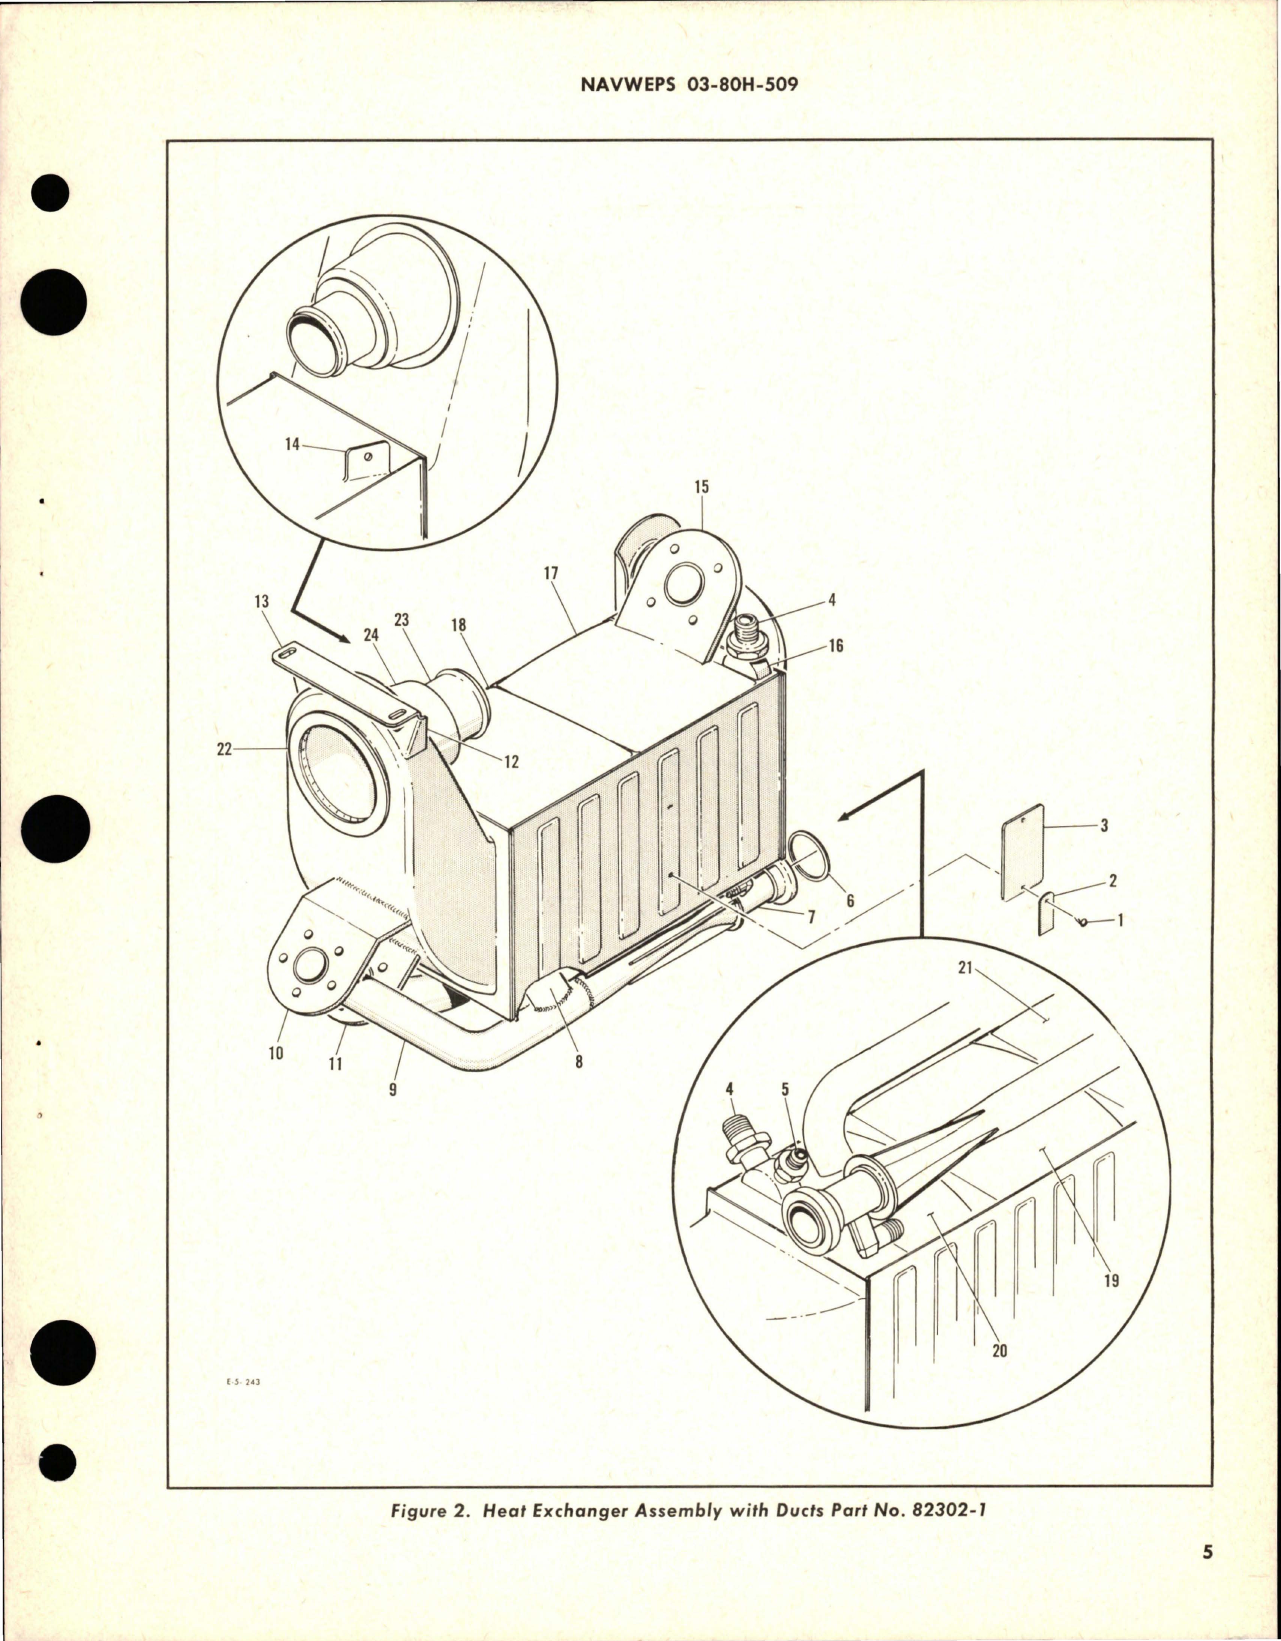 Sample page 5 from AirCorps Library document: Overhaul Instructions with Parts Breakdown for Heat Exchanger Assembly with Ducts - Part 82302-1